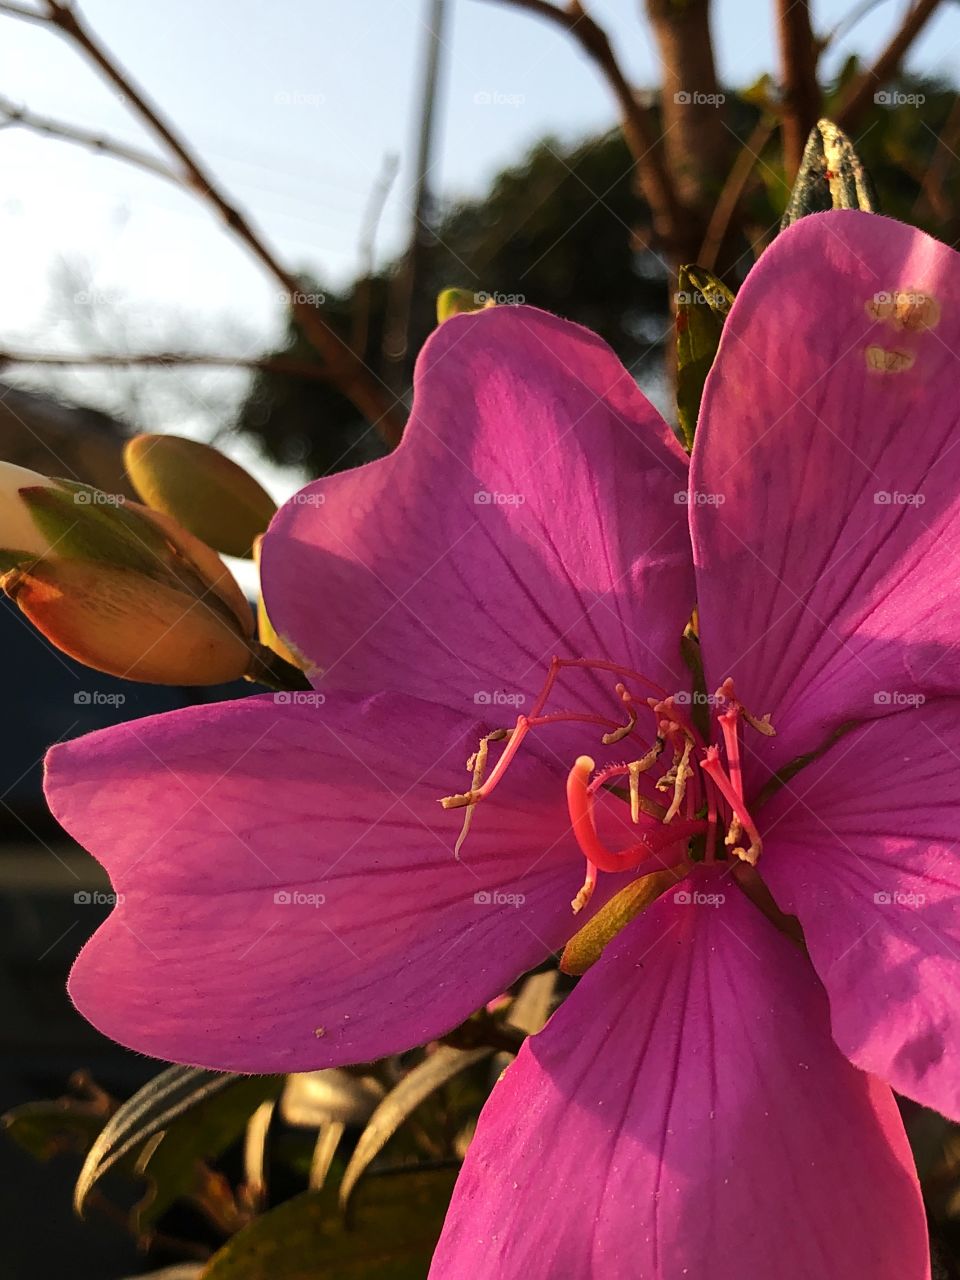 A Tibouchina mutabilis flower. It is an evergreen tree that grows in Brazil, where is called Manacá da Serra, and it is known as Glory Bush in Australia. Its flowers have different colors (white to pink), which makes it a beautiful ornamental plant.